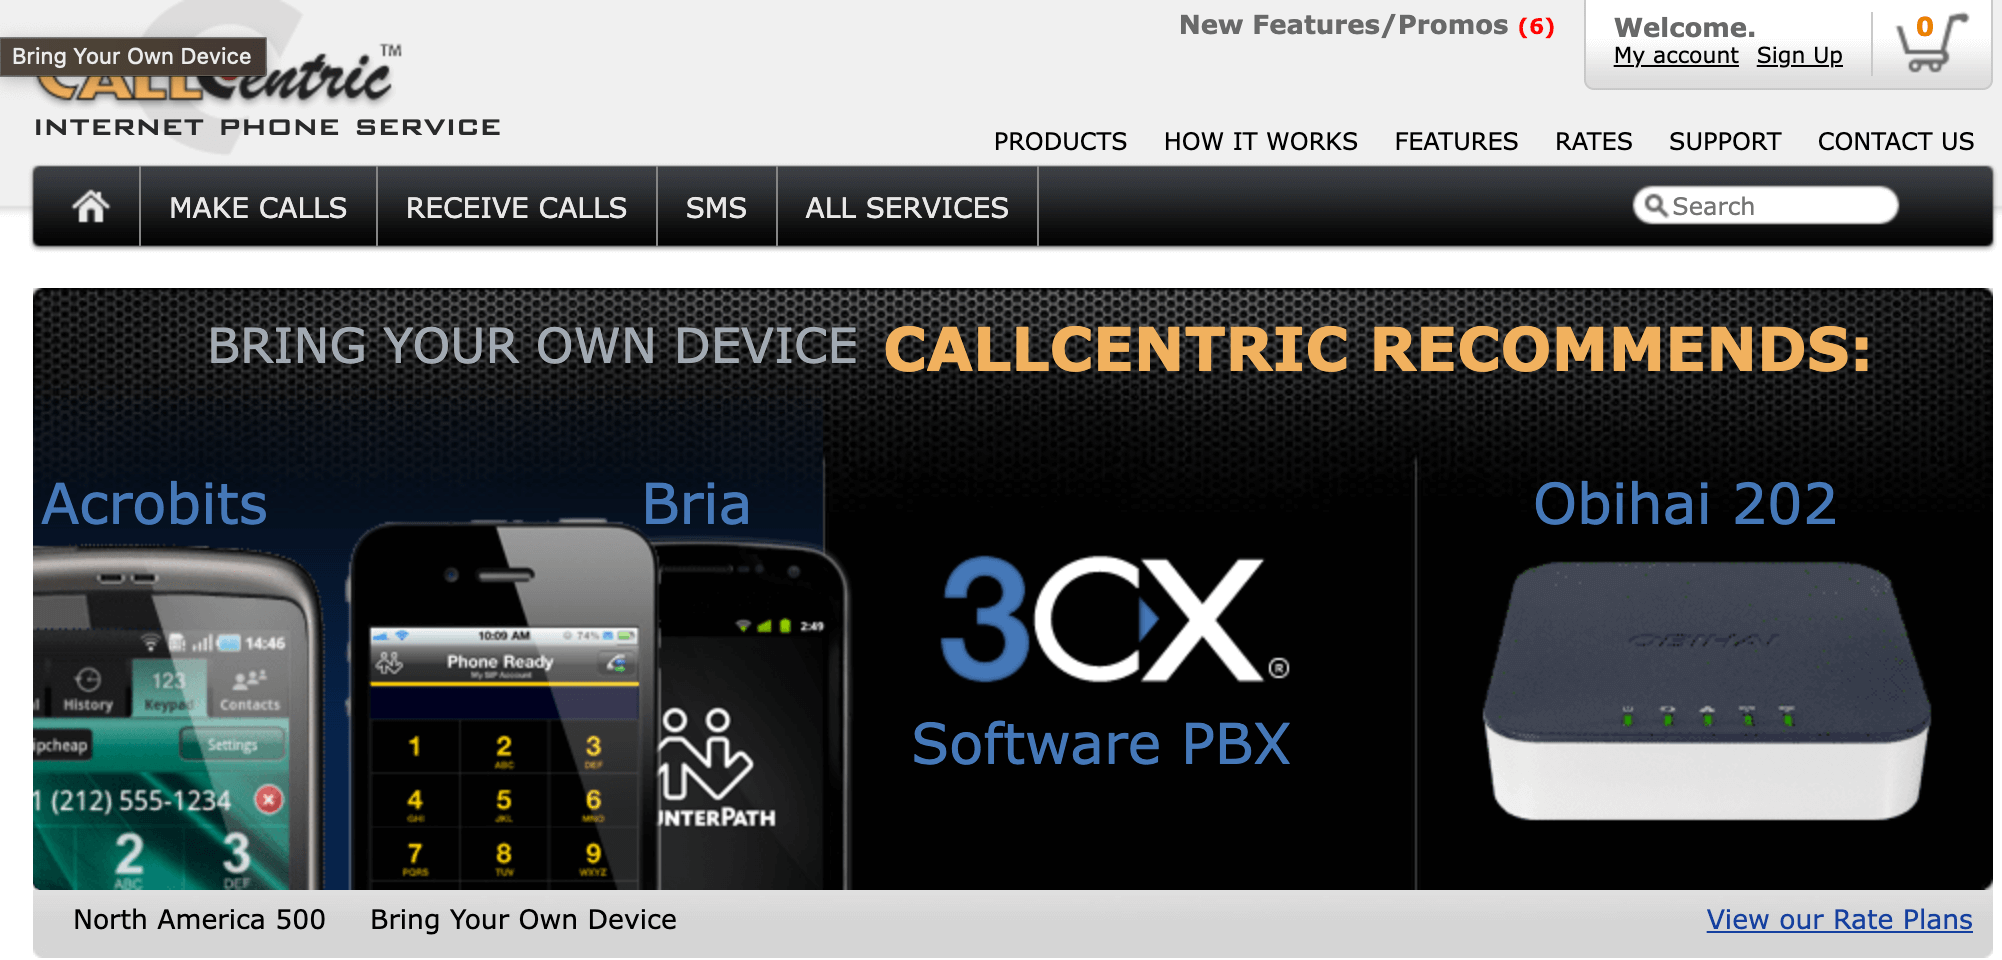 The callcentric home page